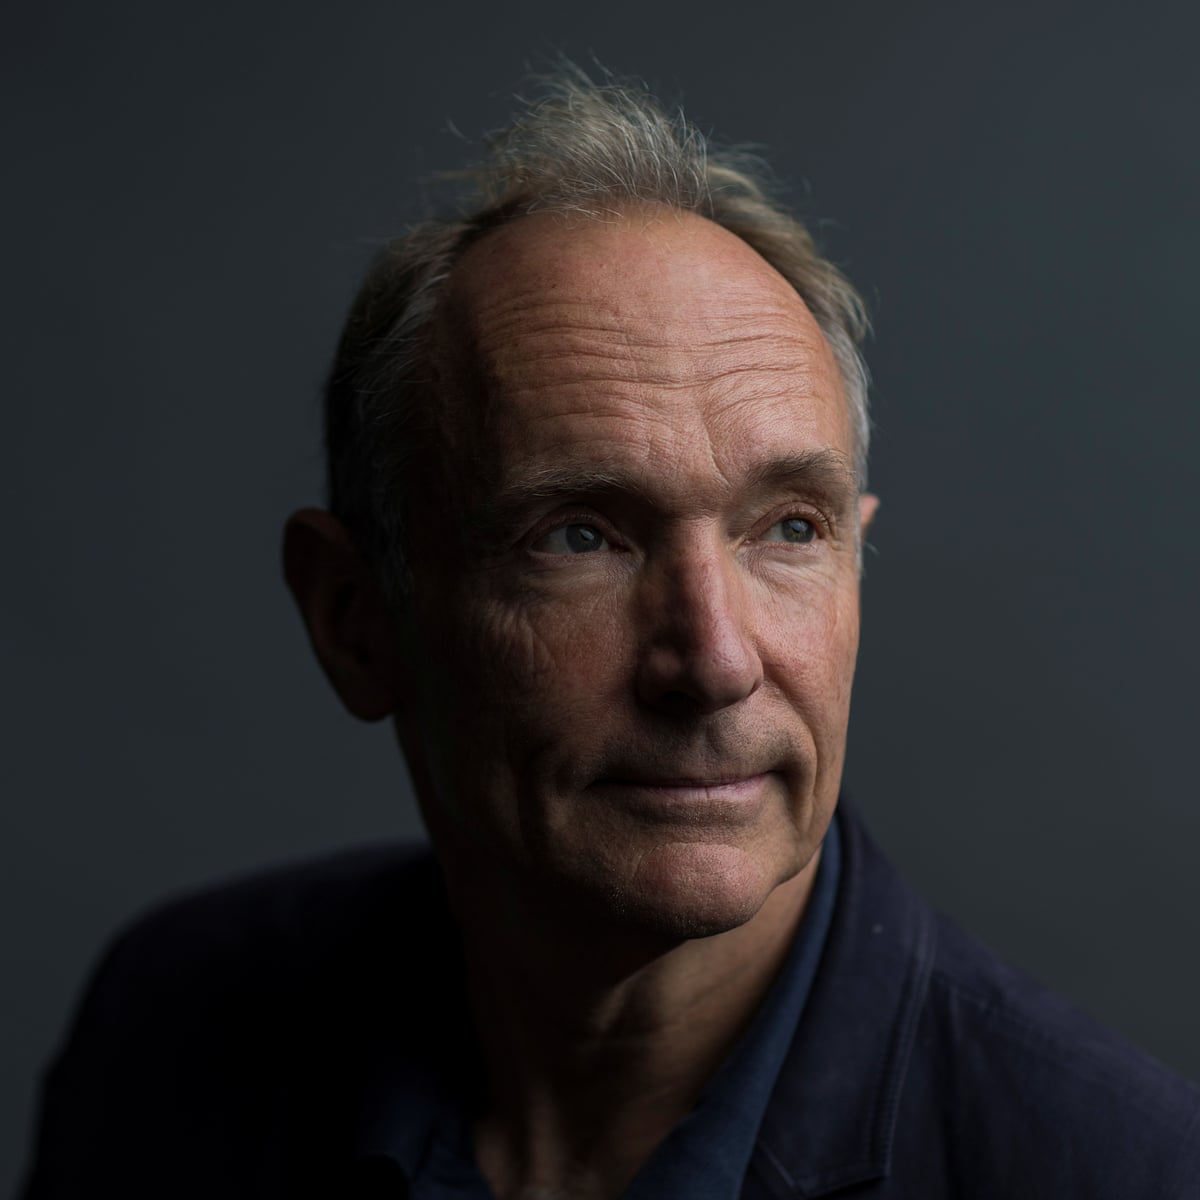 Tim Berners-Lee on 30 years of the world wide web: 'We can get the web we  want', Tim Berners-Lee